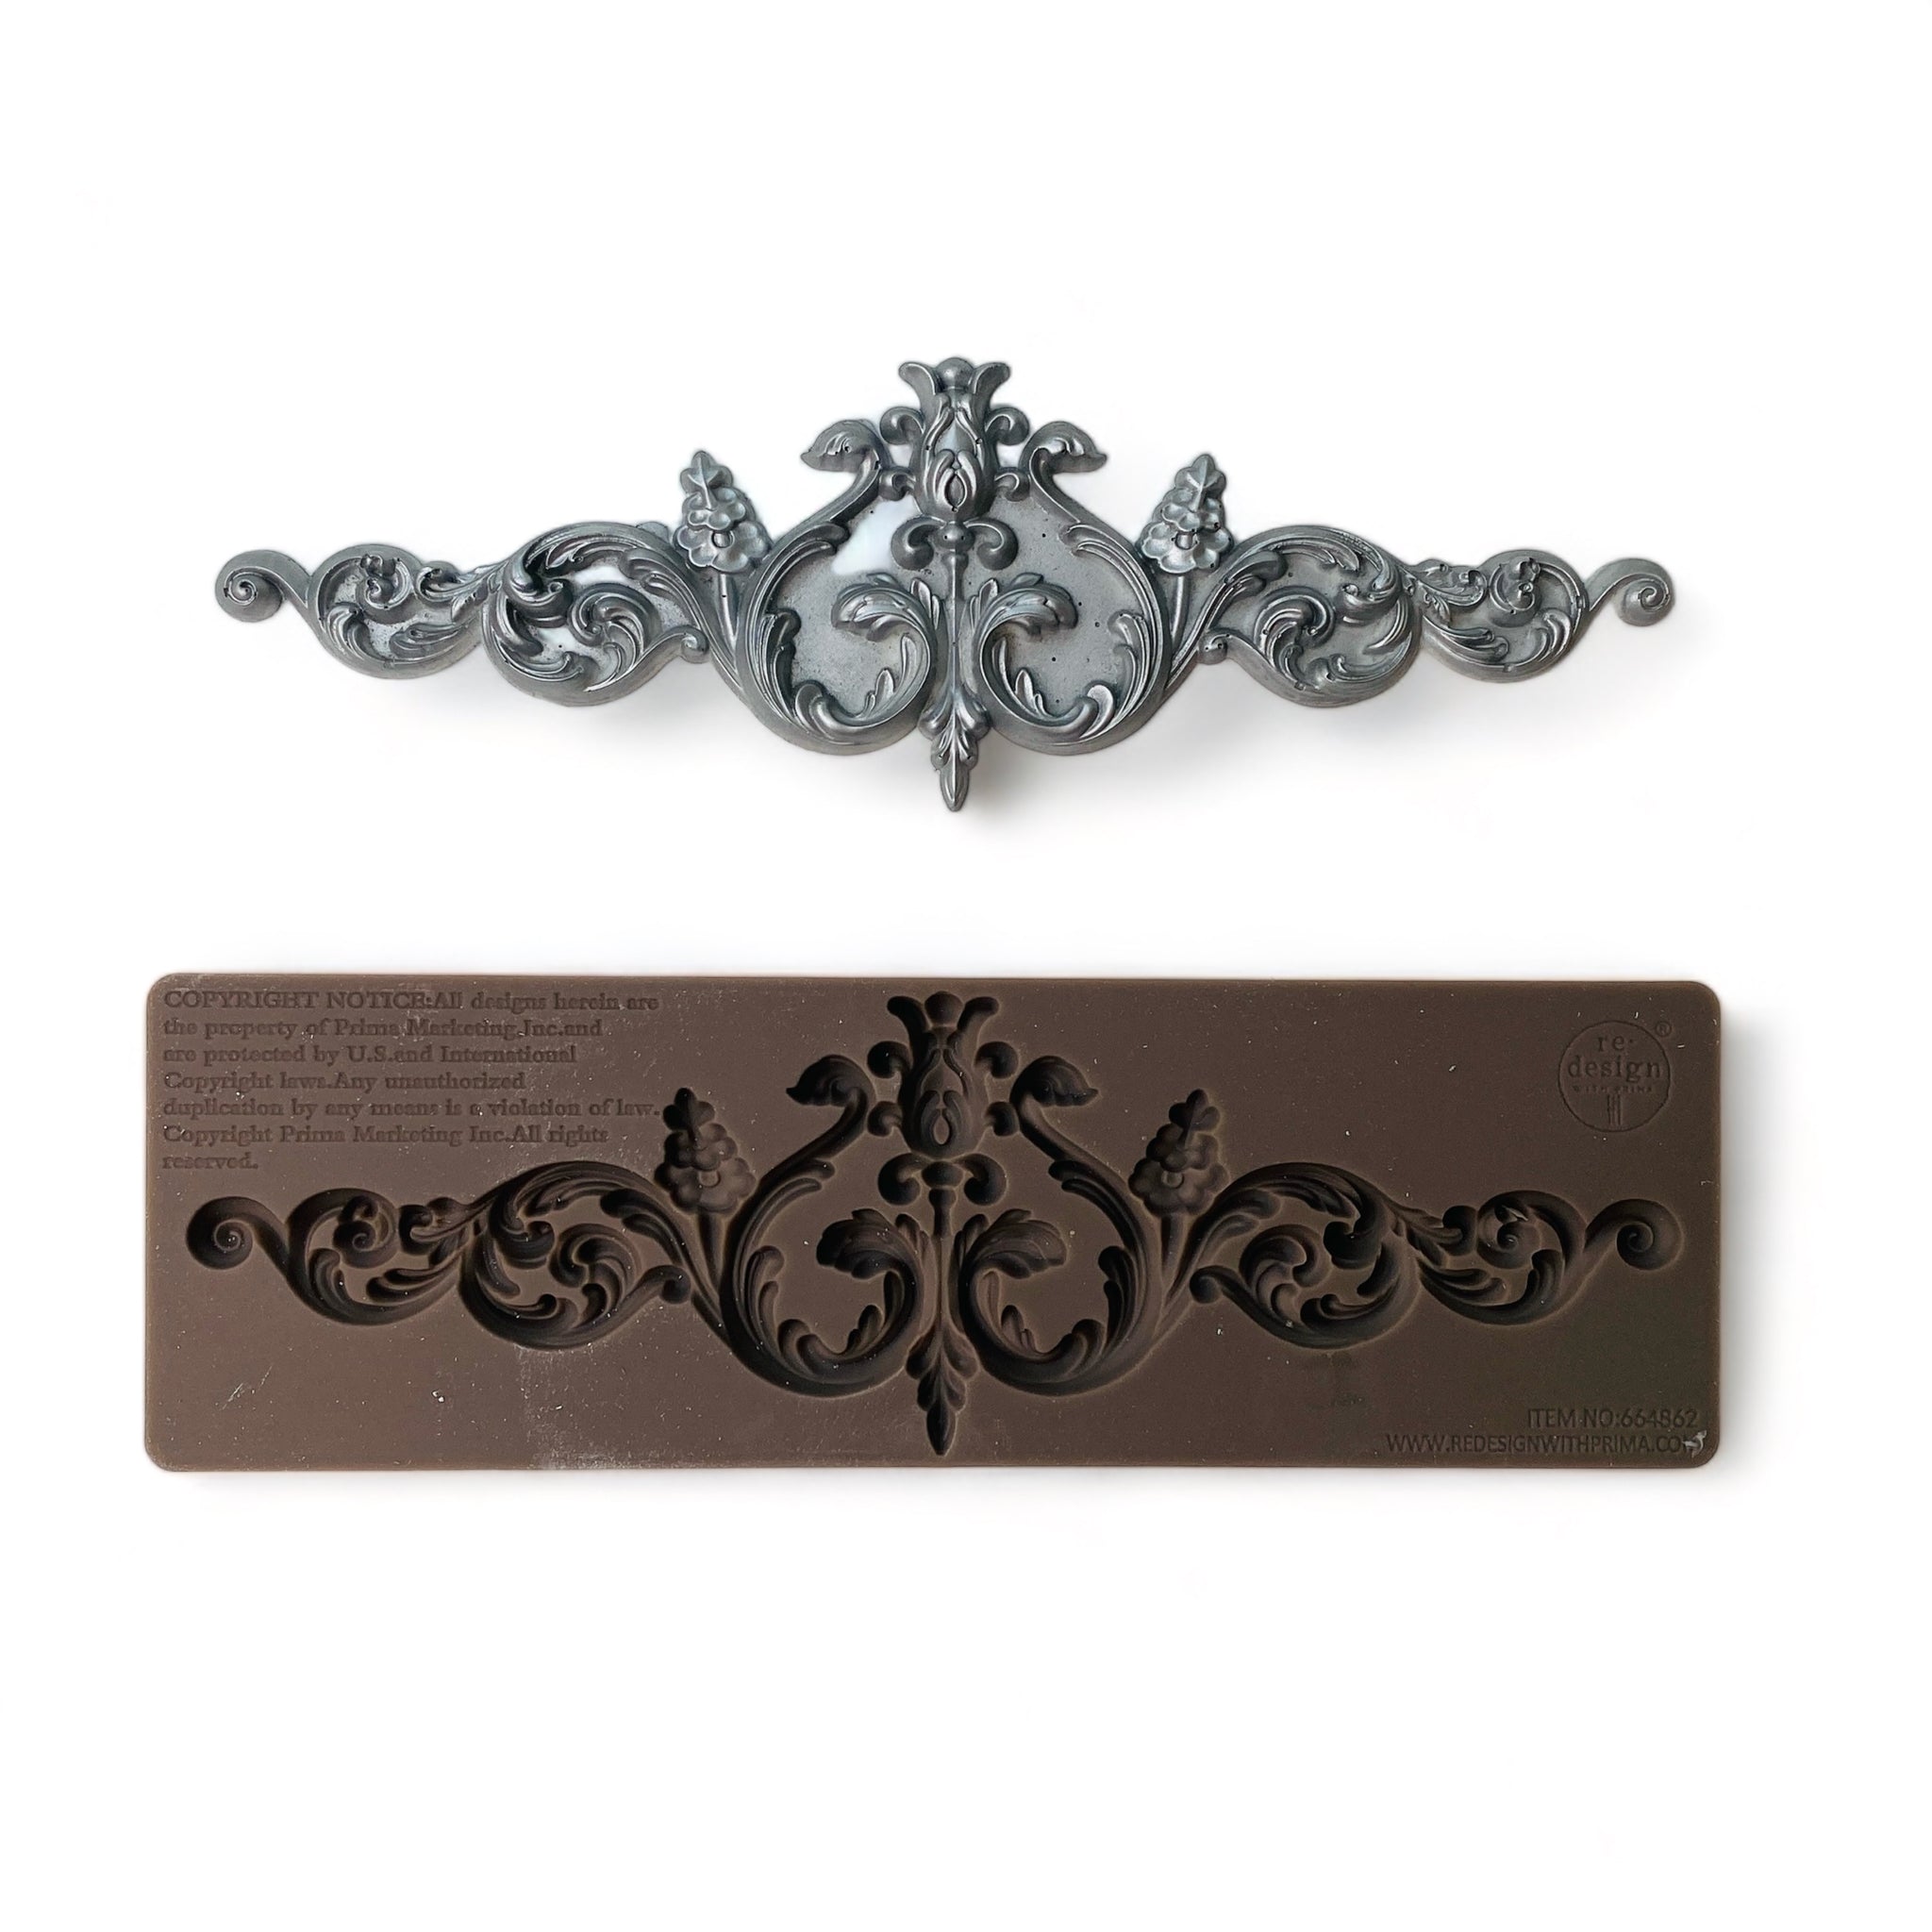 A brown silicone mold and silver colored casting of an ornate scroll design are against a white background.